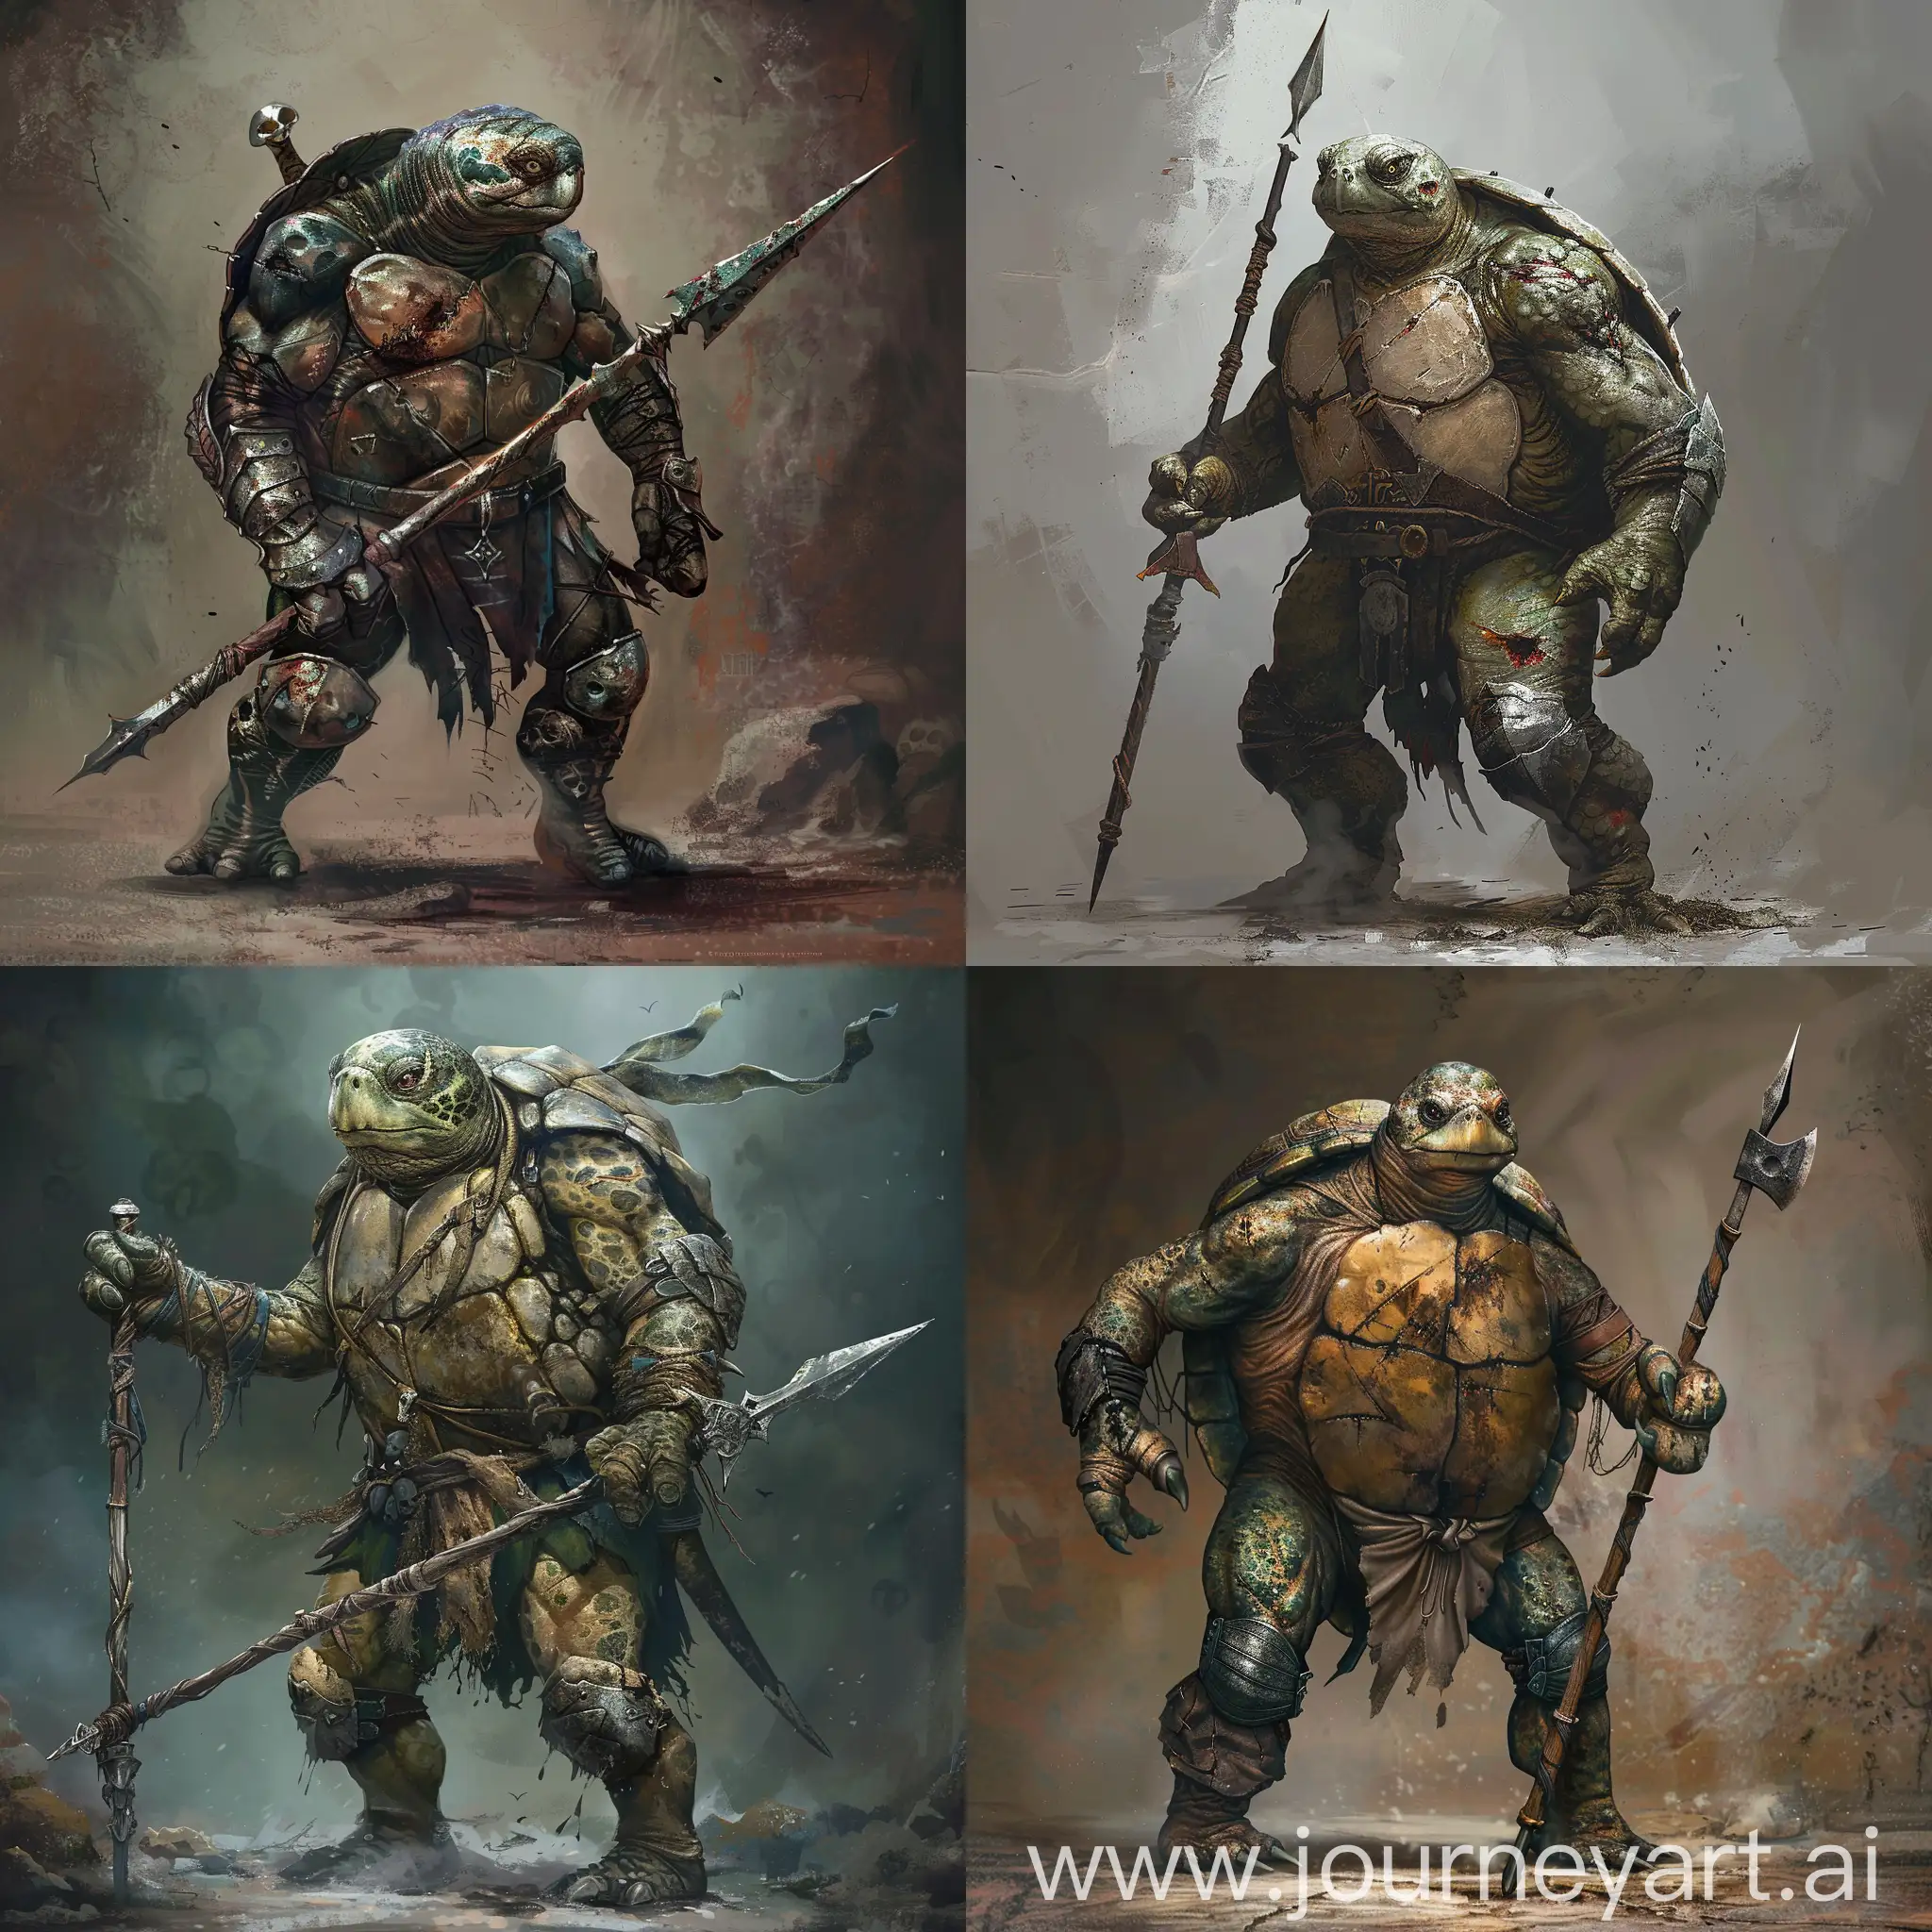 Scarred-Barbarian-Turtle-Warrior-with-Knight-Spear